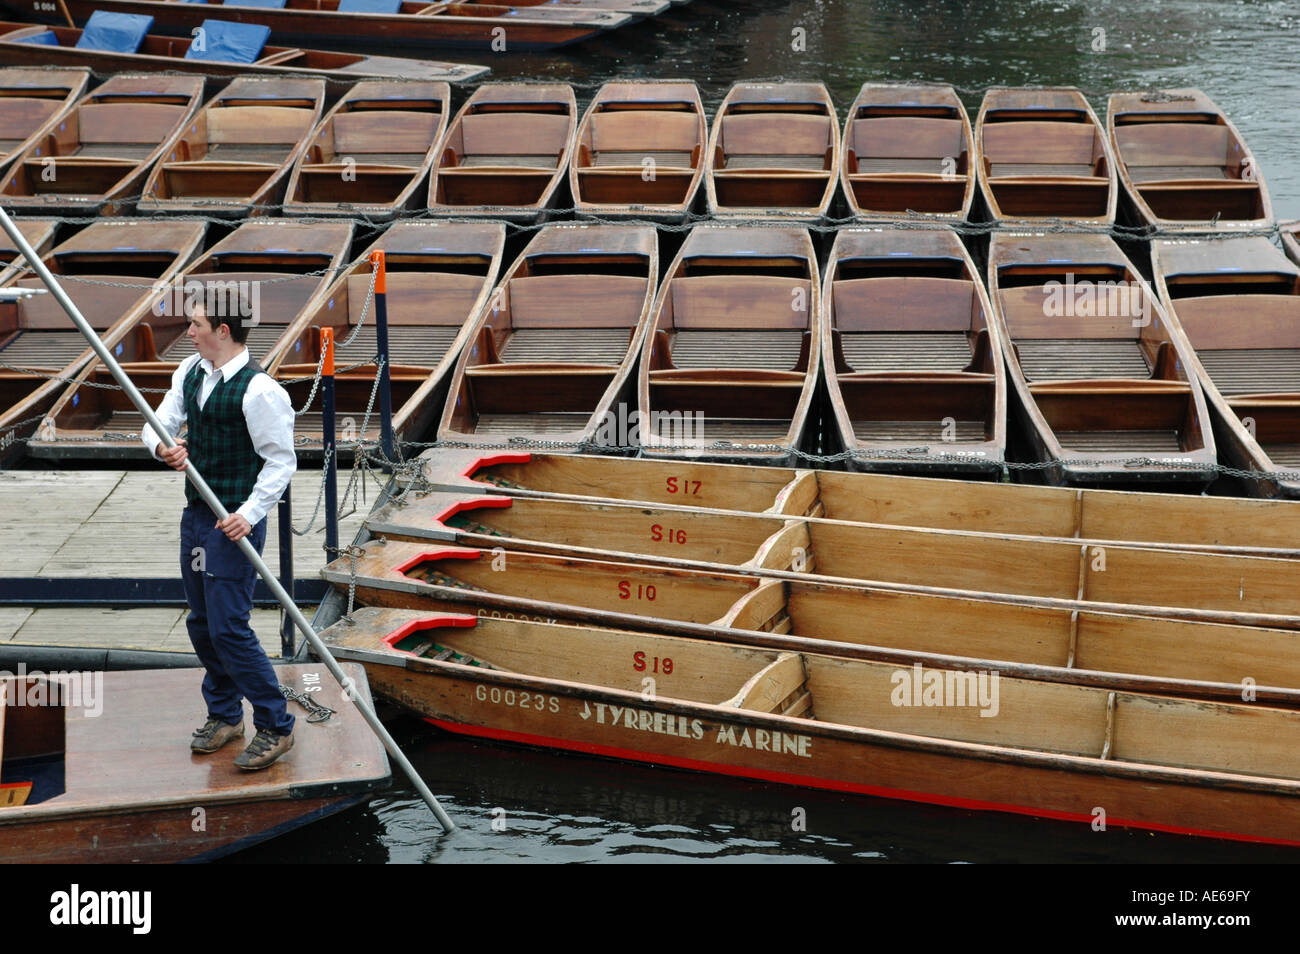 Punter with punts on the Cam river, England Stock Photo